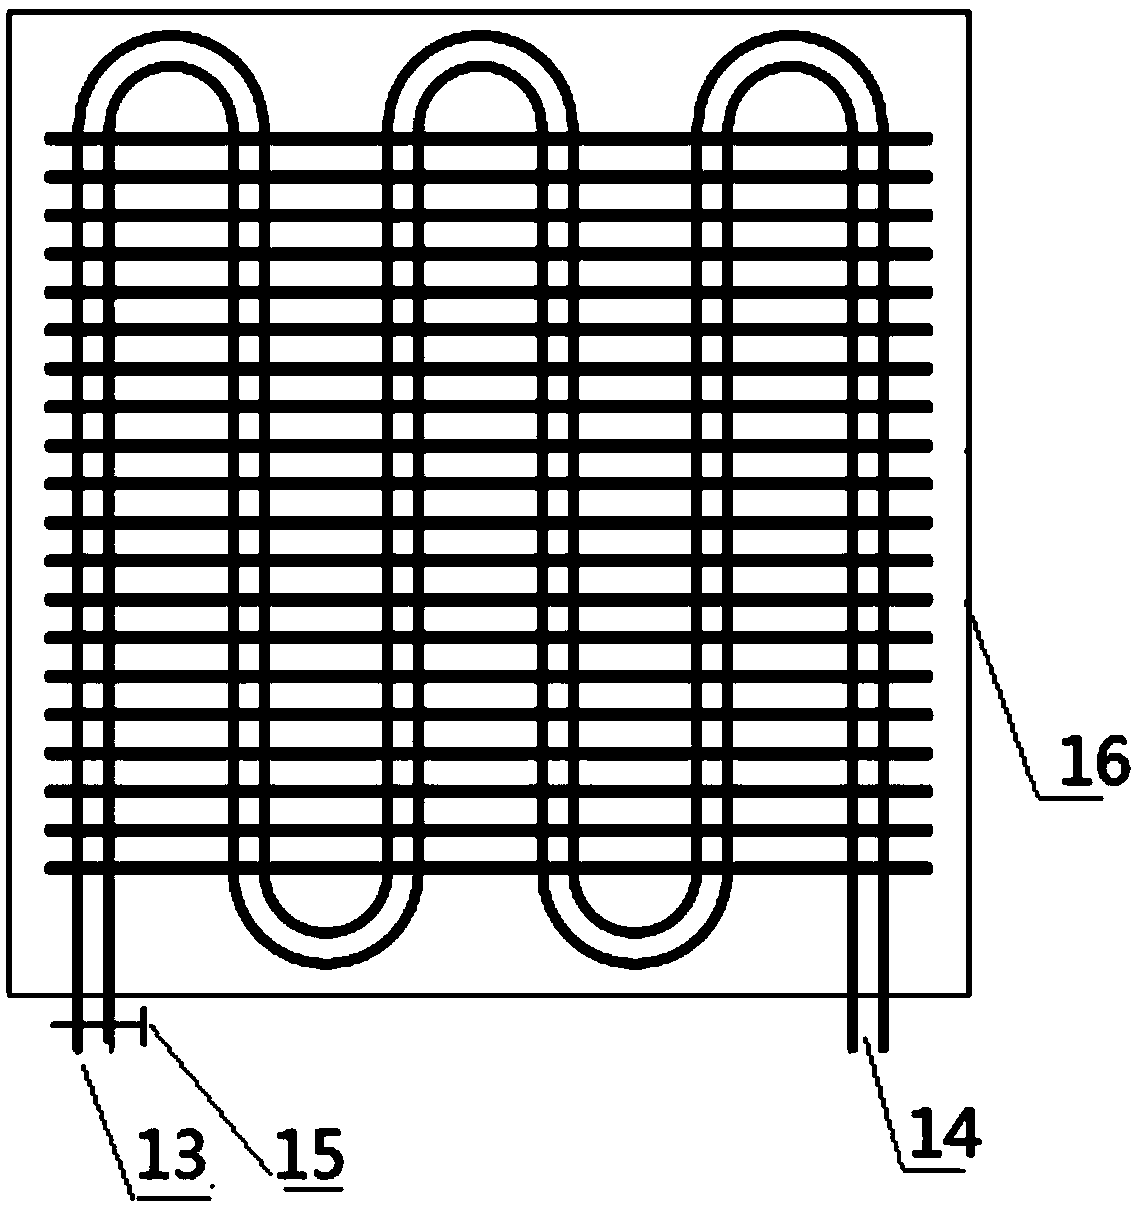 A thermoelectric power generation device using the waste heat on the surface of the ladle